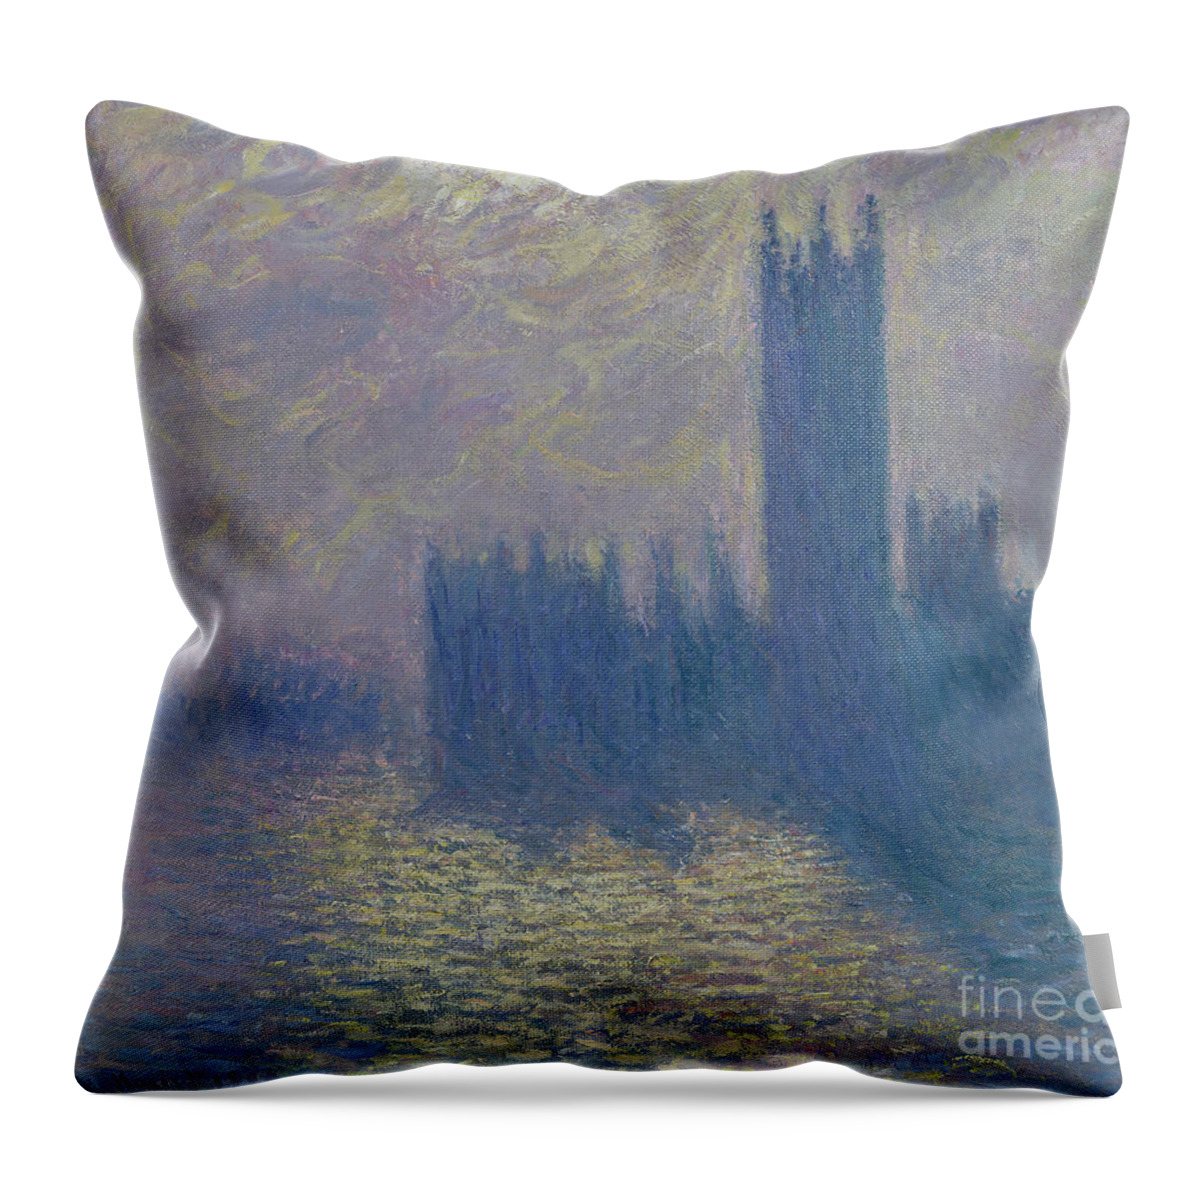 The Throw Pillow featuring the painting The Houses of Parliament Stormy Sky by Claude Monet